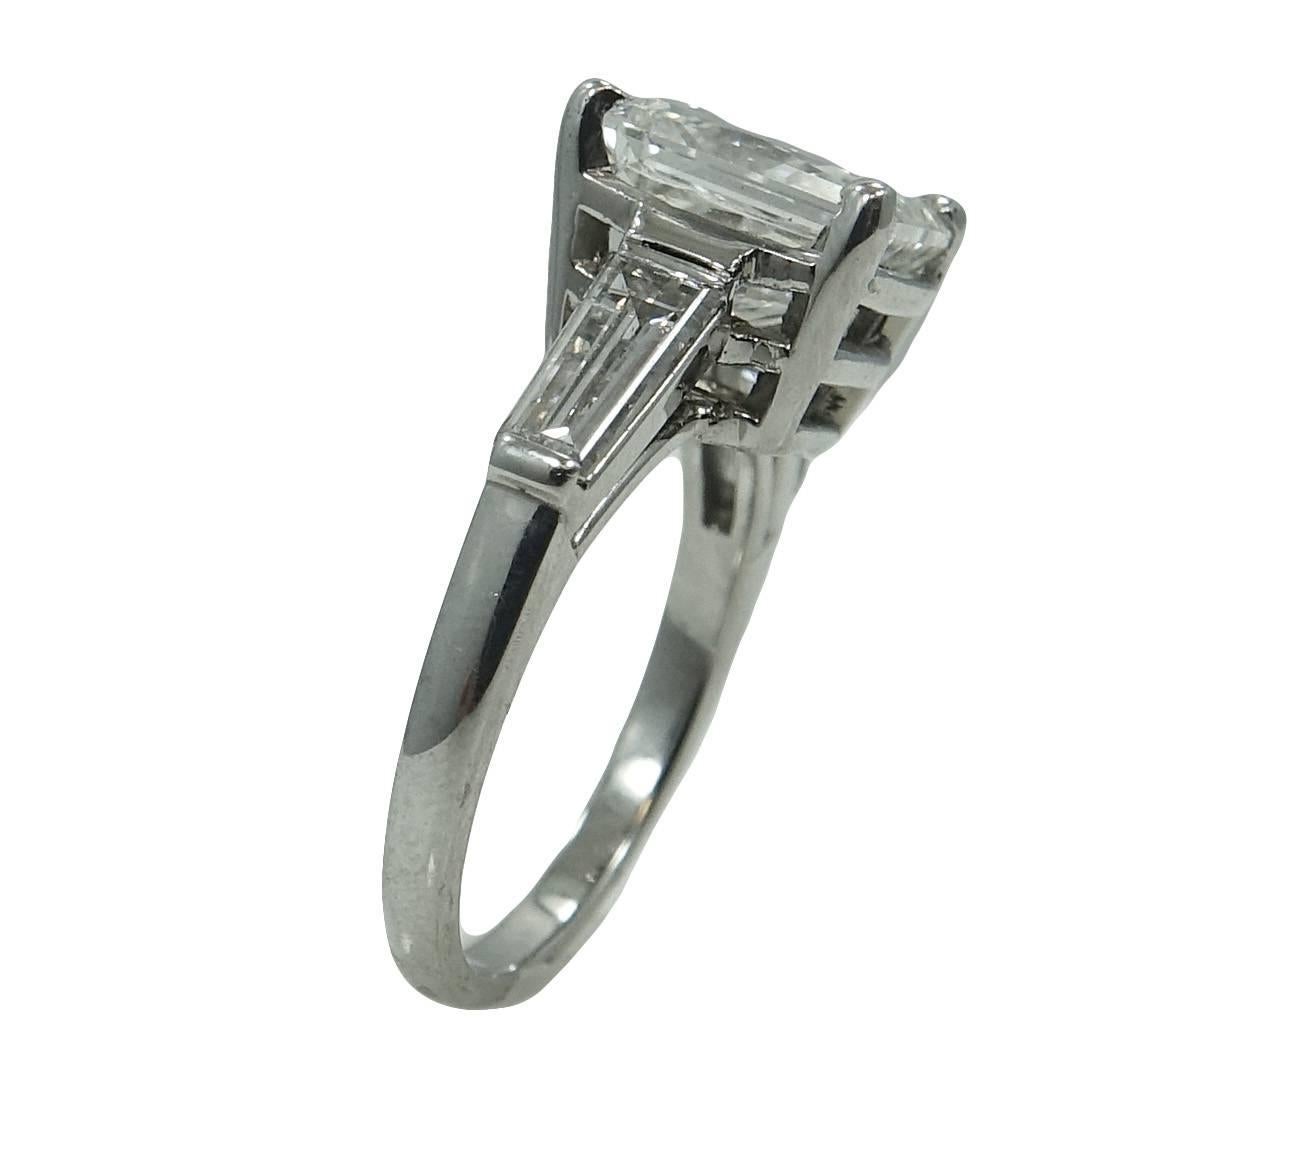 Platinum Baguette Mounting With Two Diamonds Weighing A Total Carat Weight Of .60ct With Center Modified Brilliant Cut-Cornered Rectangular Diamond Weighing A Total Carat Weight Of 4.82ct With an H Color And Si2 Clarity. GIA Report #: 5172364983.